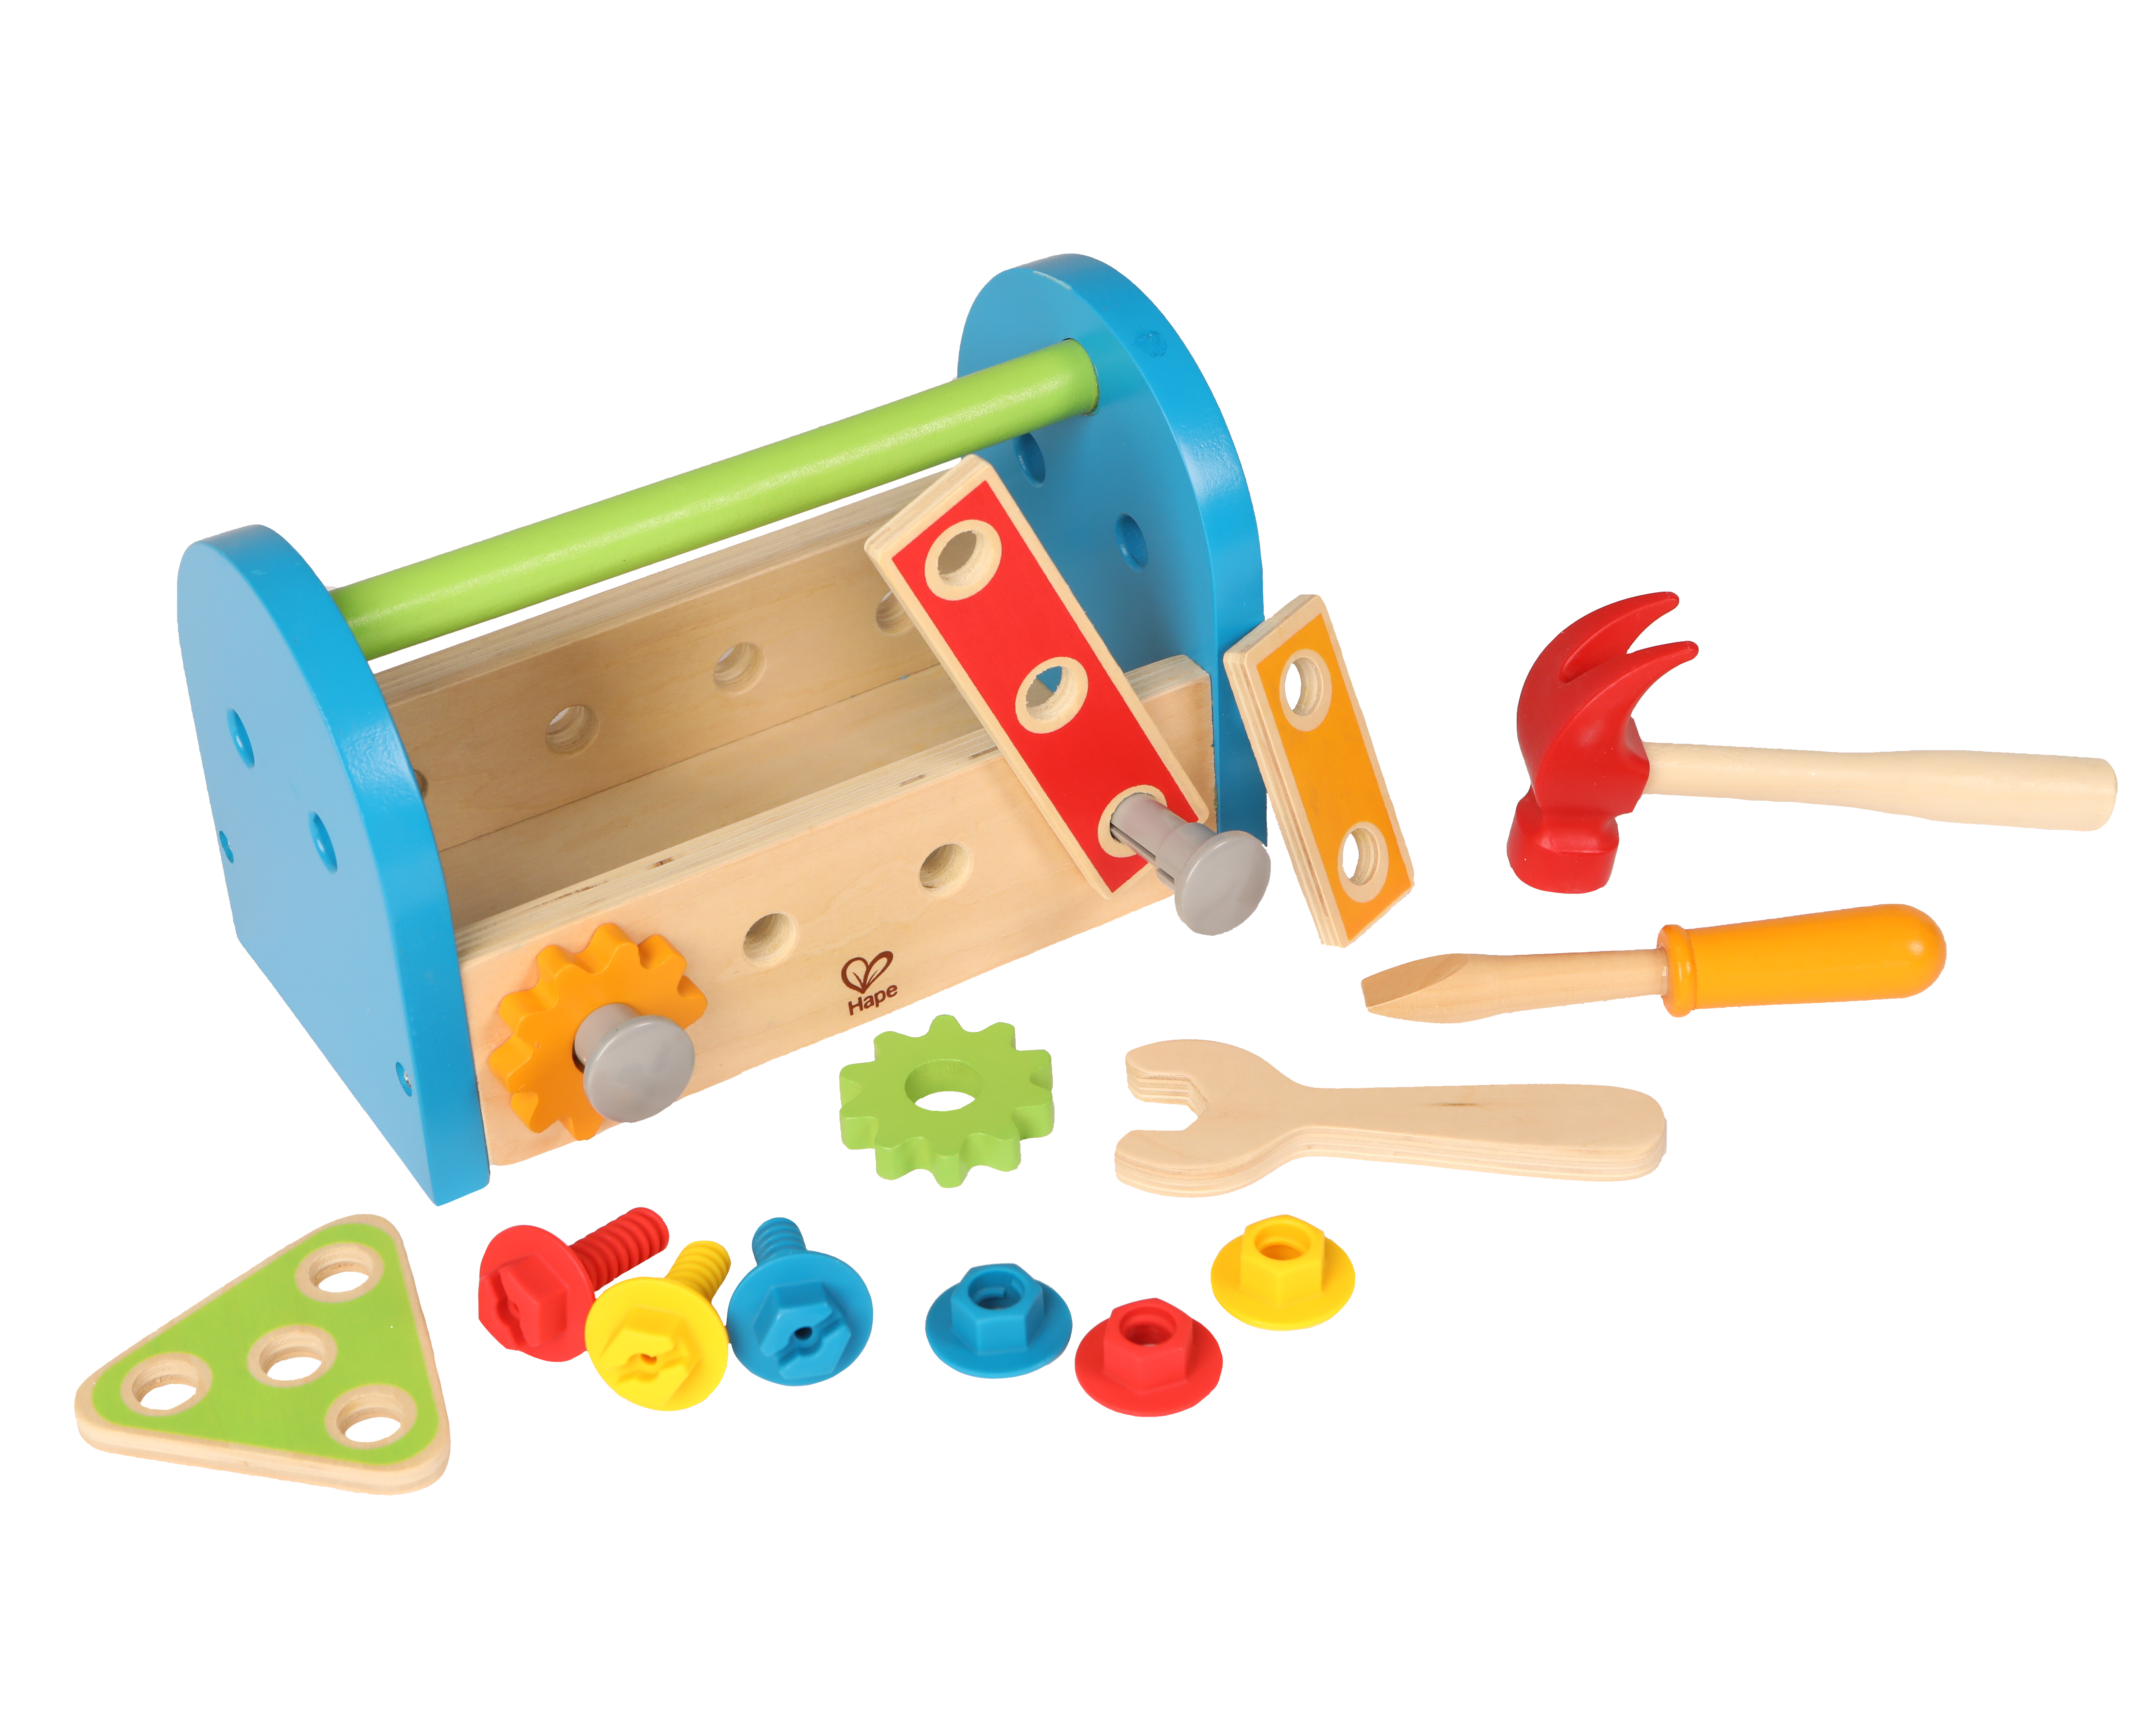 Product photo on transparent background of child wooden tool box in blue, red, green and yellow with toys spread out